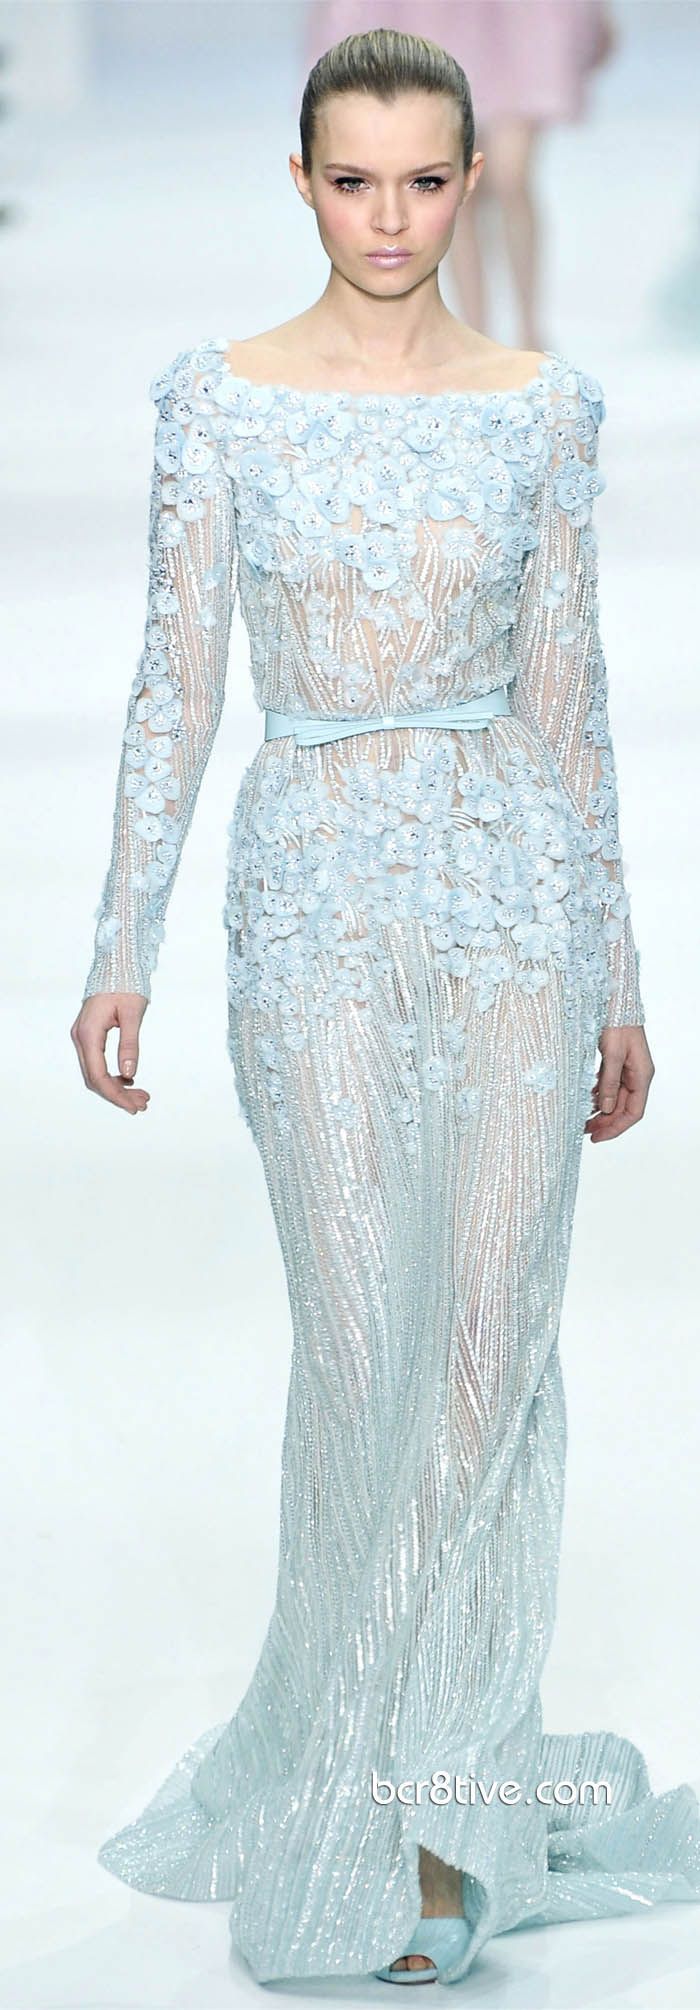 Elie Saab Spring Summer 2012-2013 Haute Couture Blair Waldorf wore this in the series finale as her wedding dress